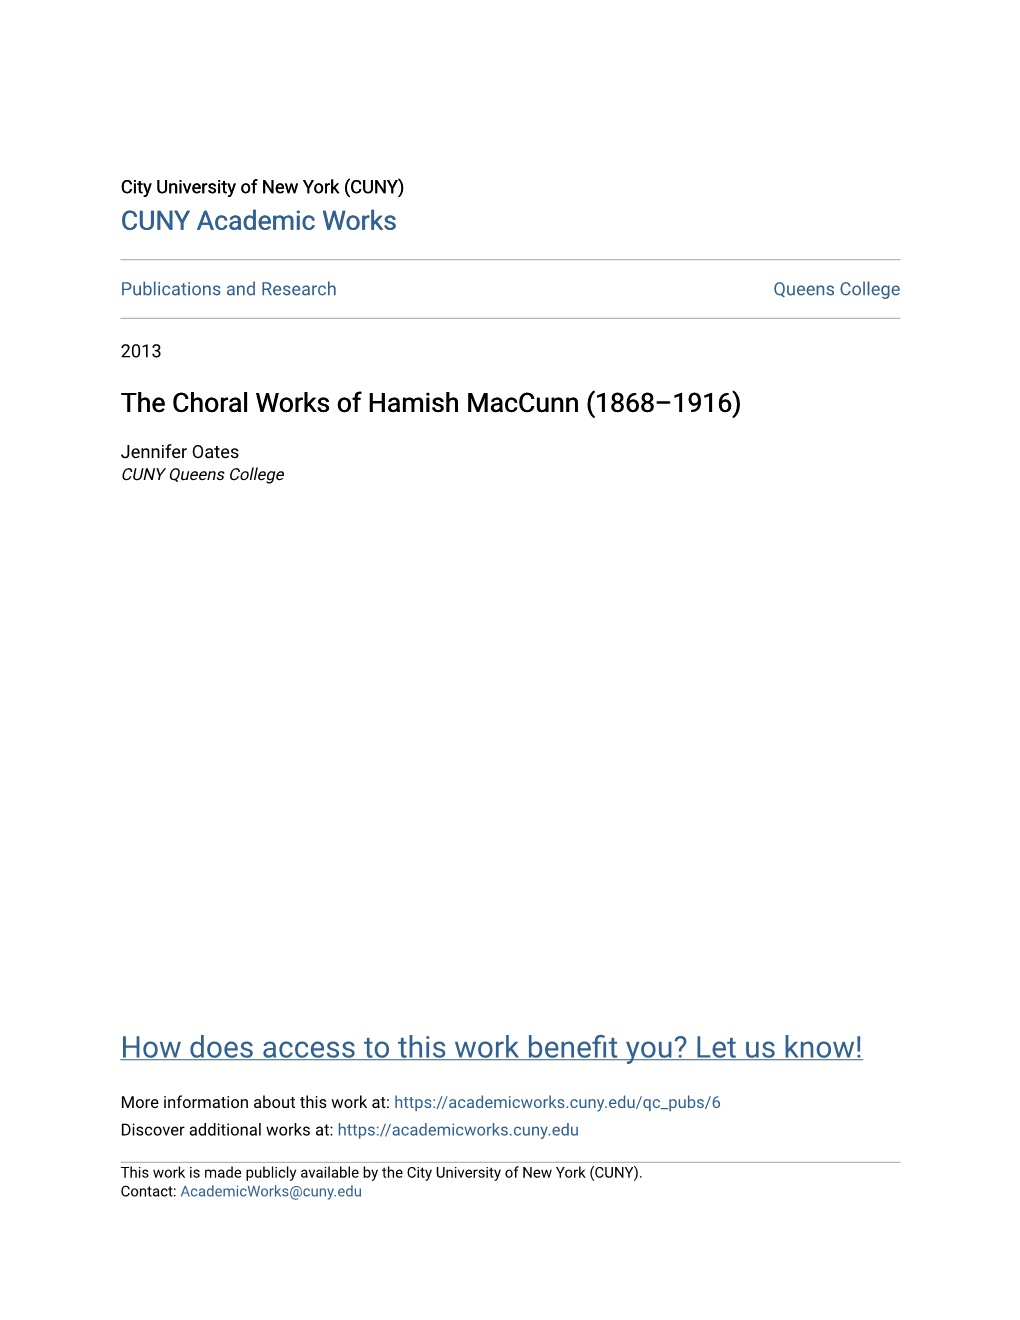 The Choral Works of Hamish Maccunn (1868–1916)